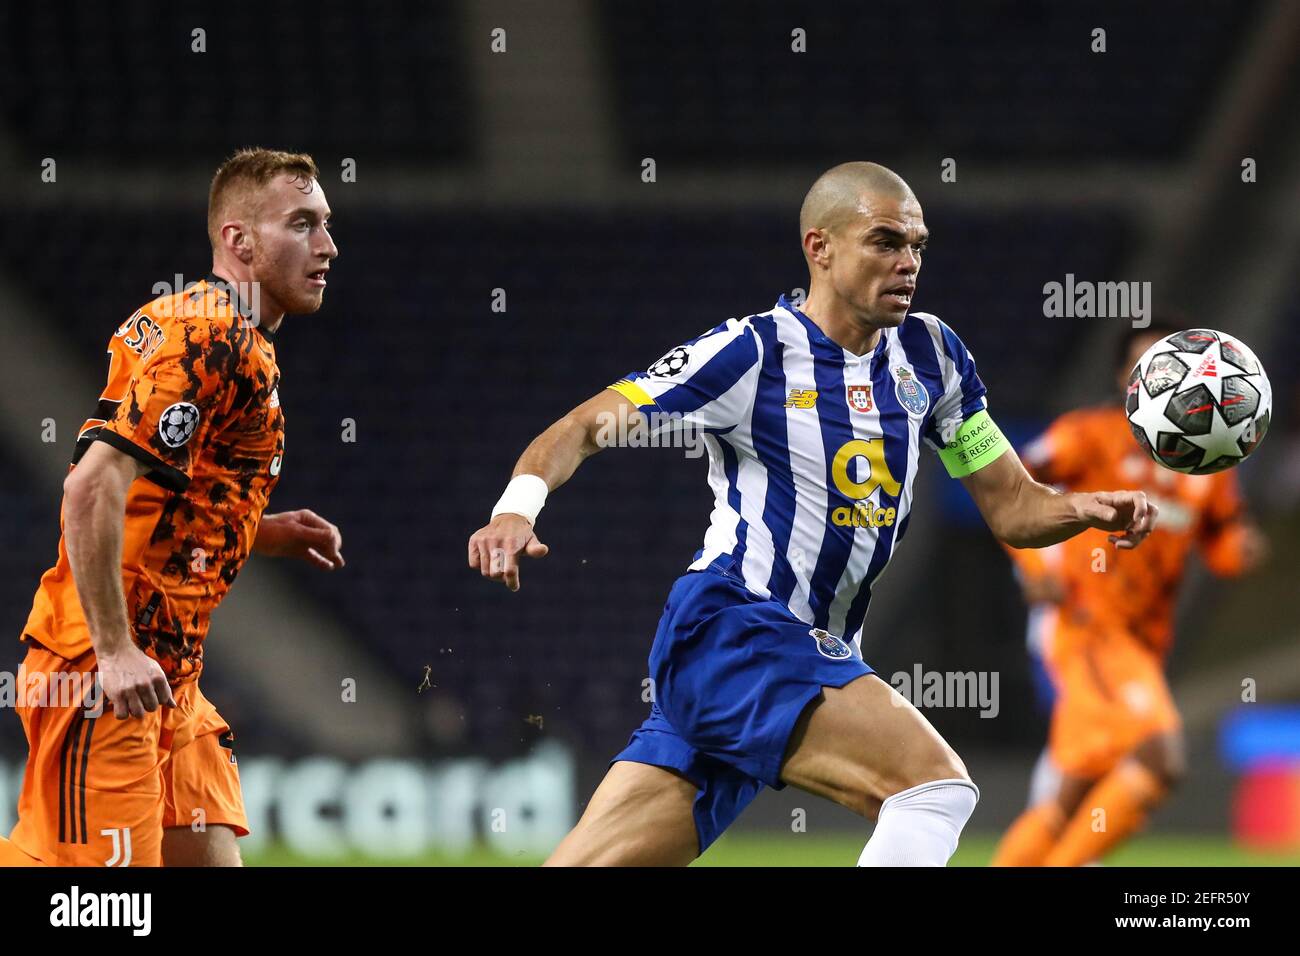 Porto Portugal 17th Feb 2021 Fc Porto Hosted The Juventus Football Club Tonight At Estadio Do Dragao In The First Leg Of The 2020 2021 Champions League Round Of 16 Pepe And Kulusevski